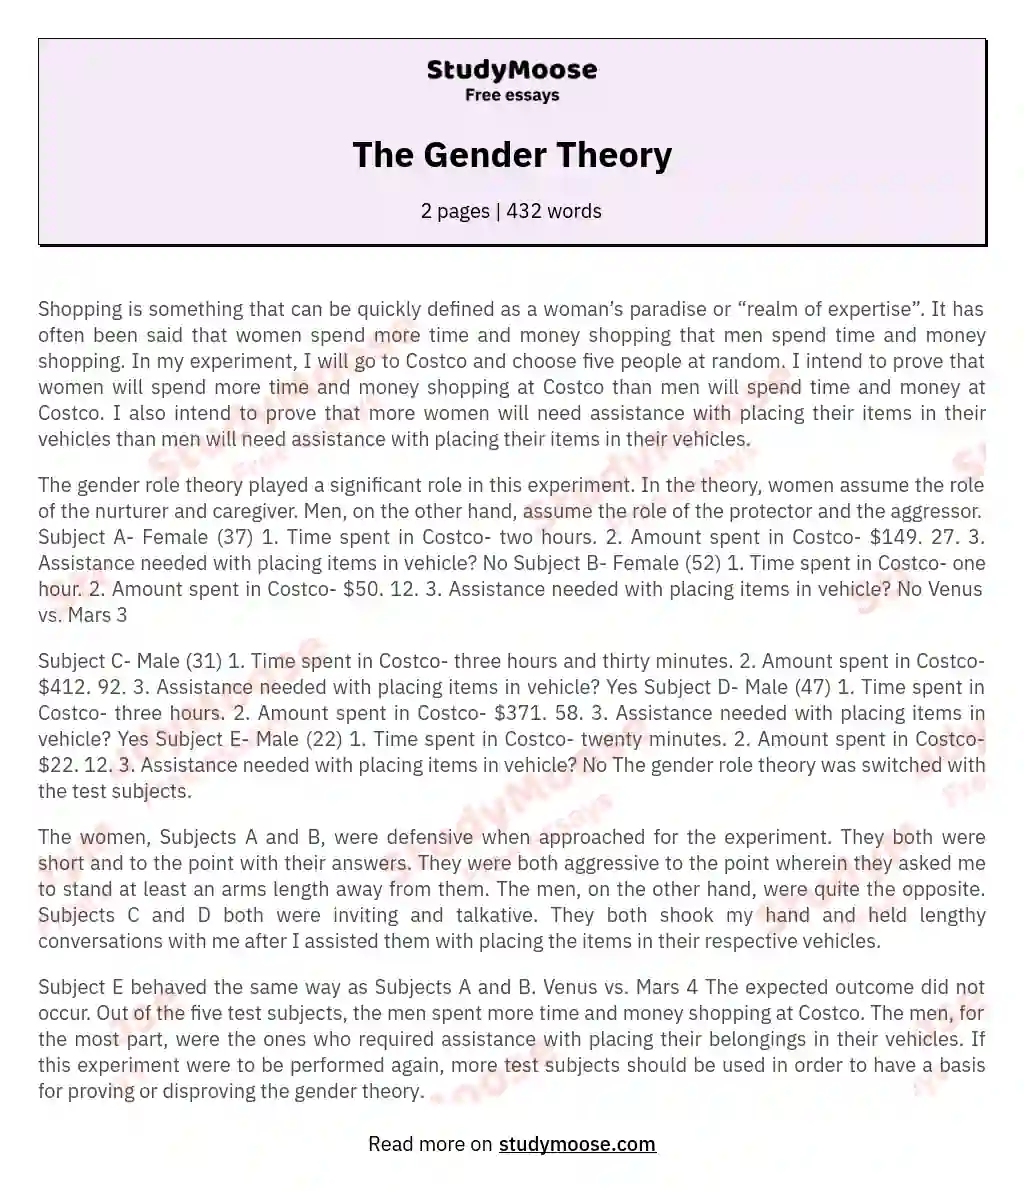 The Gender Theory essay